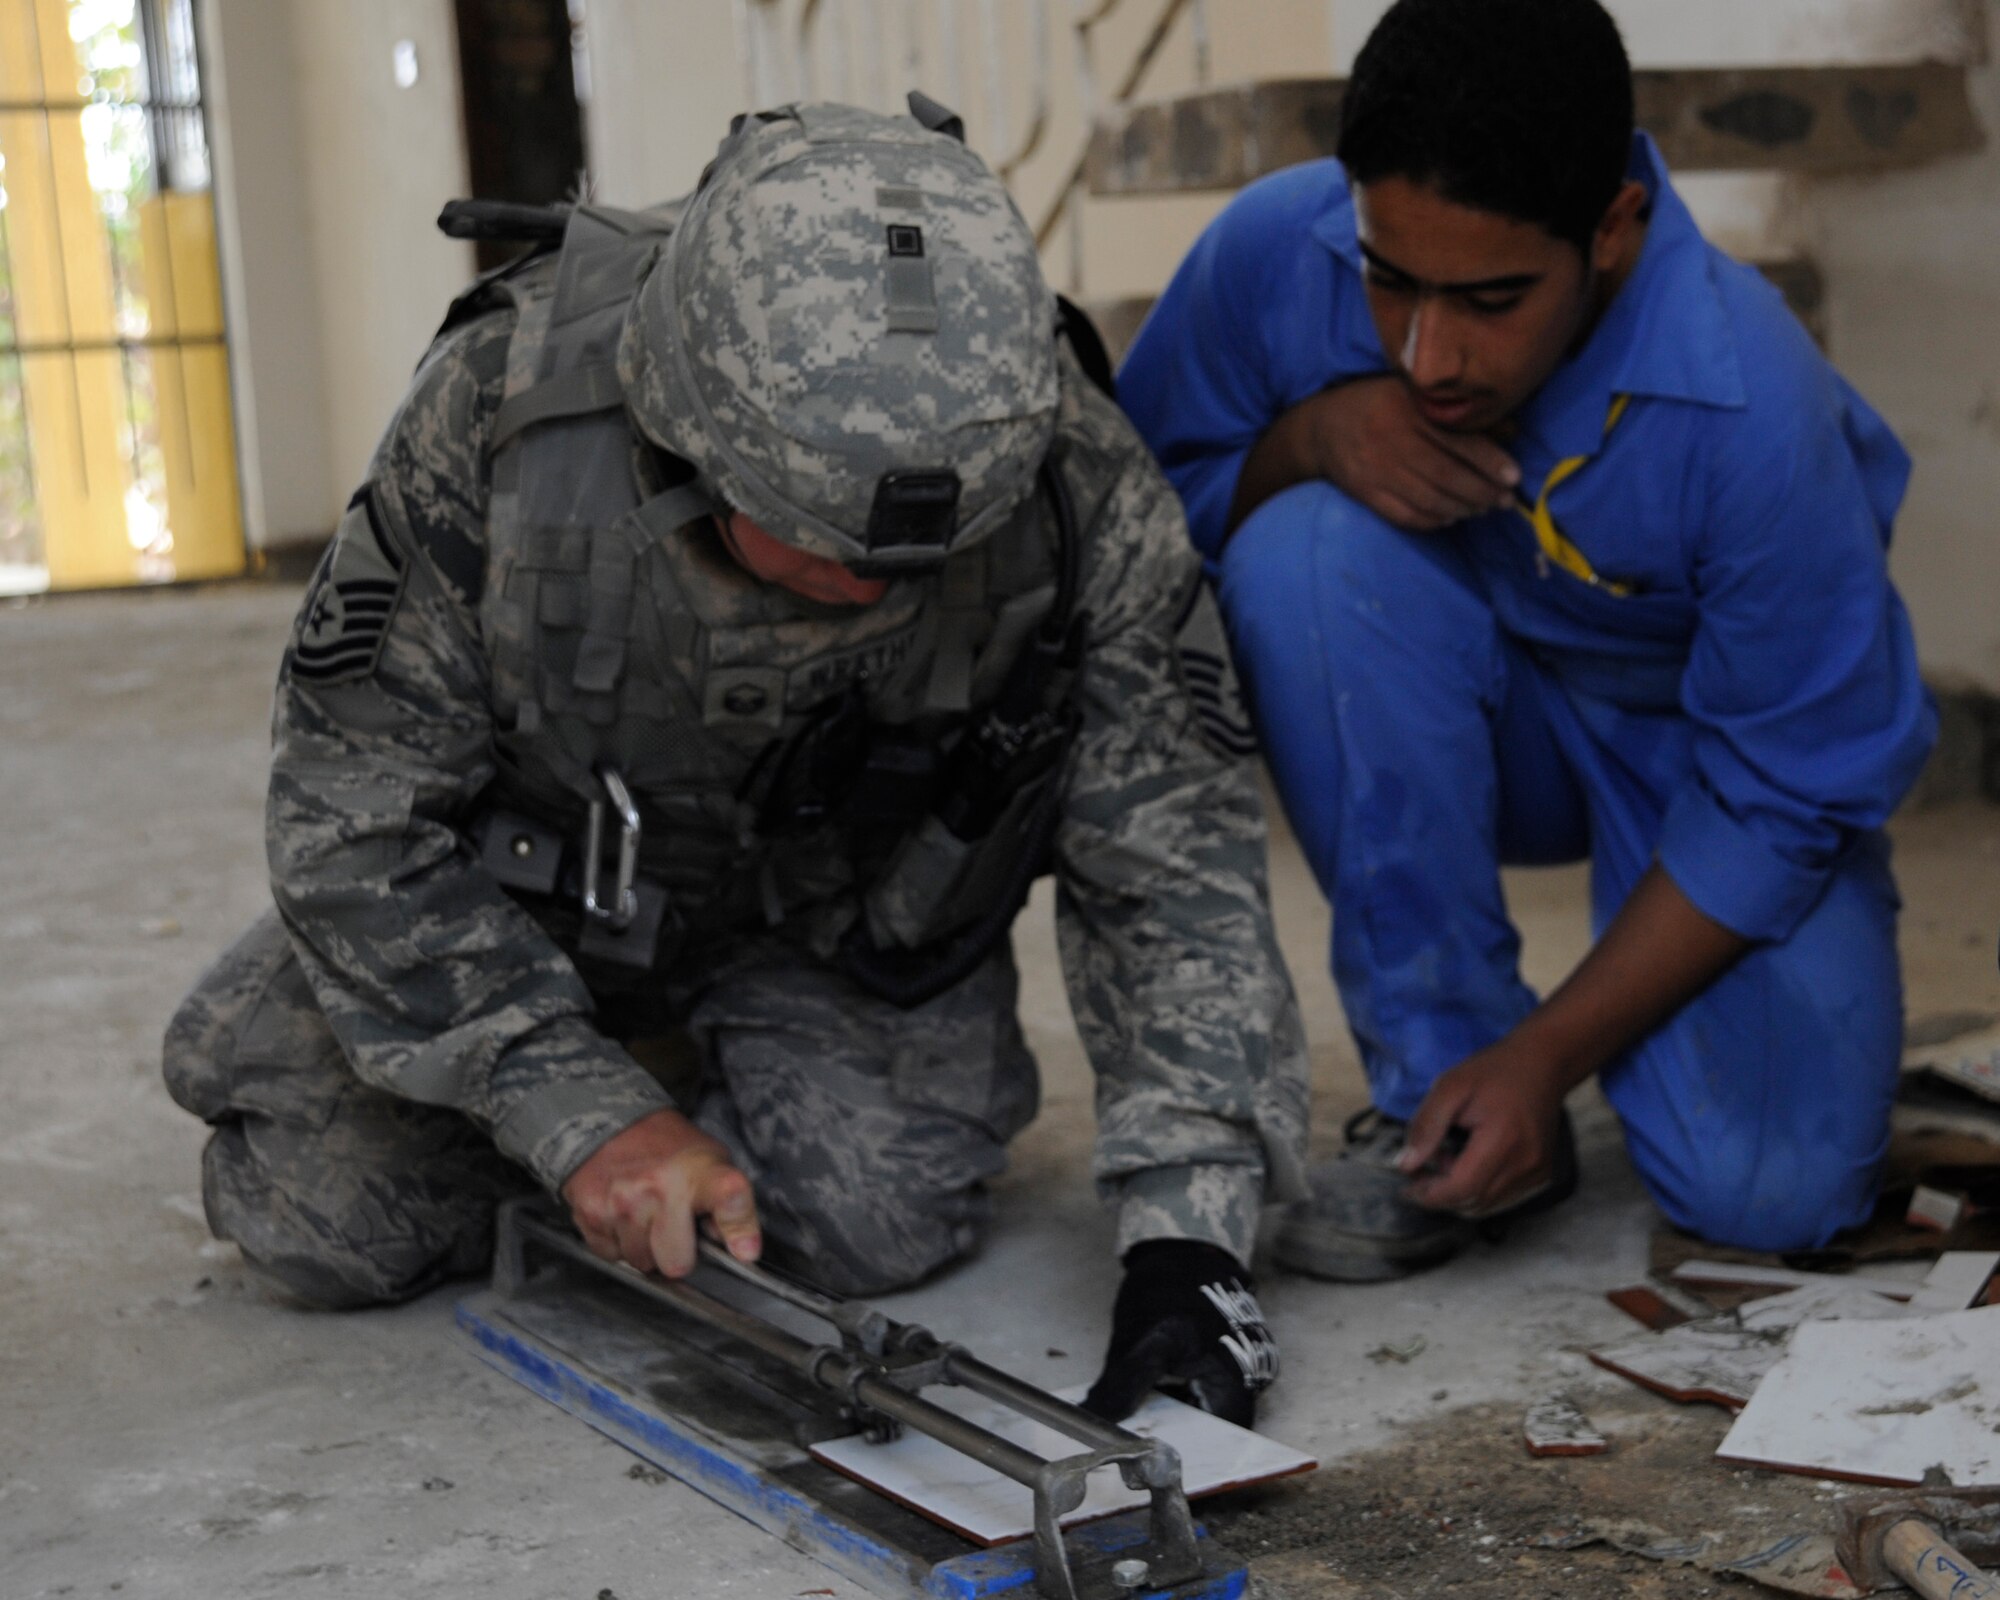 HAWR RAJAB, IRAQ -- U.S. Air Force Master Sgt. Patrick Wrathell, 1st Sgt. and non-commissioned officer in charge of downtown operations with 557th Expeditionary RED HORSE squadron, shows an Iraqi student worker how to cut tile at Hawr Rajab, Iraq on Aug. 27. Wrathell, a East Tawas, Mich. native, is deployed from 823rd RED HORSE squadron, Hurlburt Field, Fla. (U.S. Air Force photo/Staff Sgt. Paul Villanueva II)